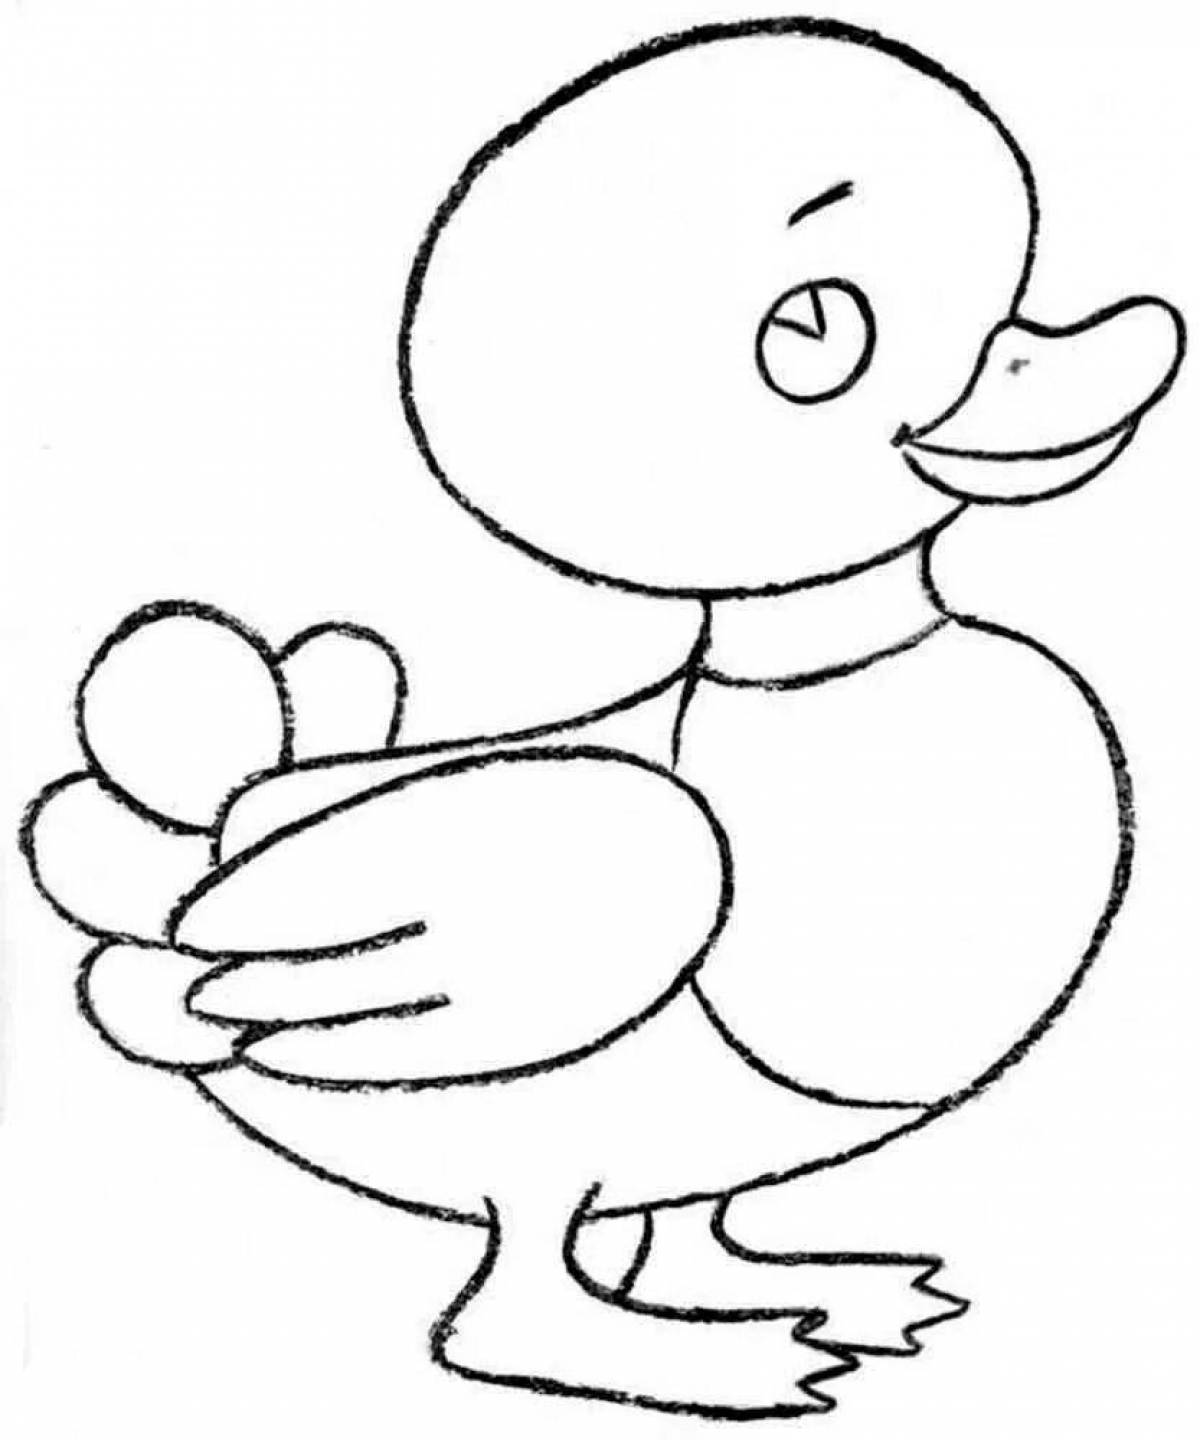 Fun coloring duck for 3-4 year olds